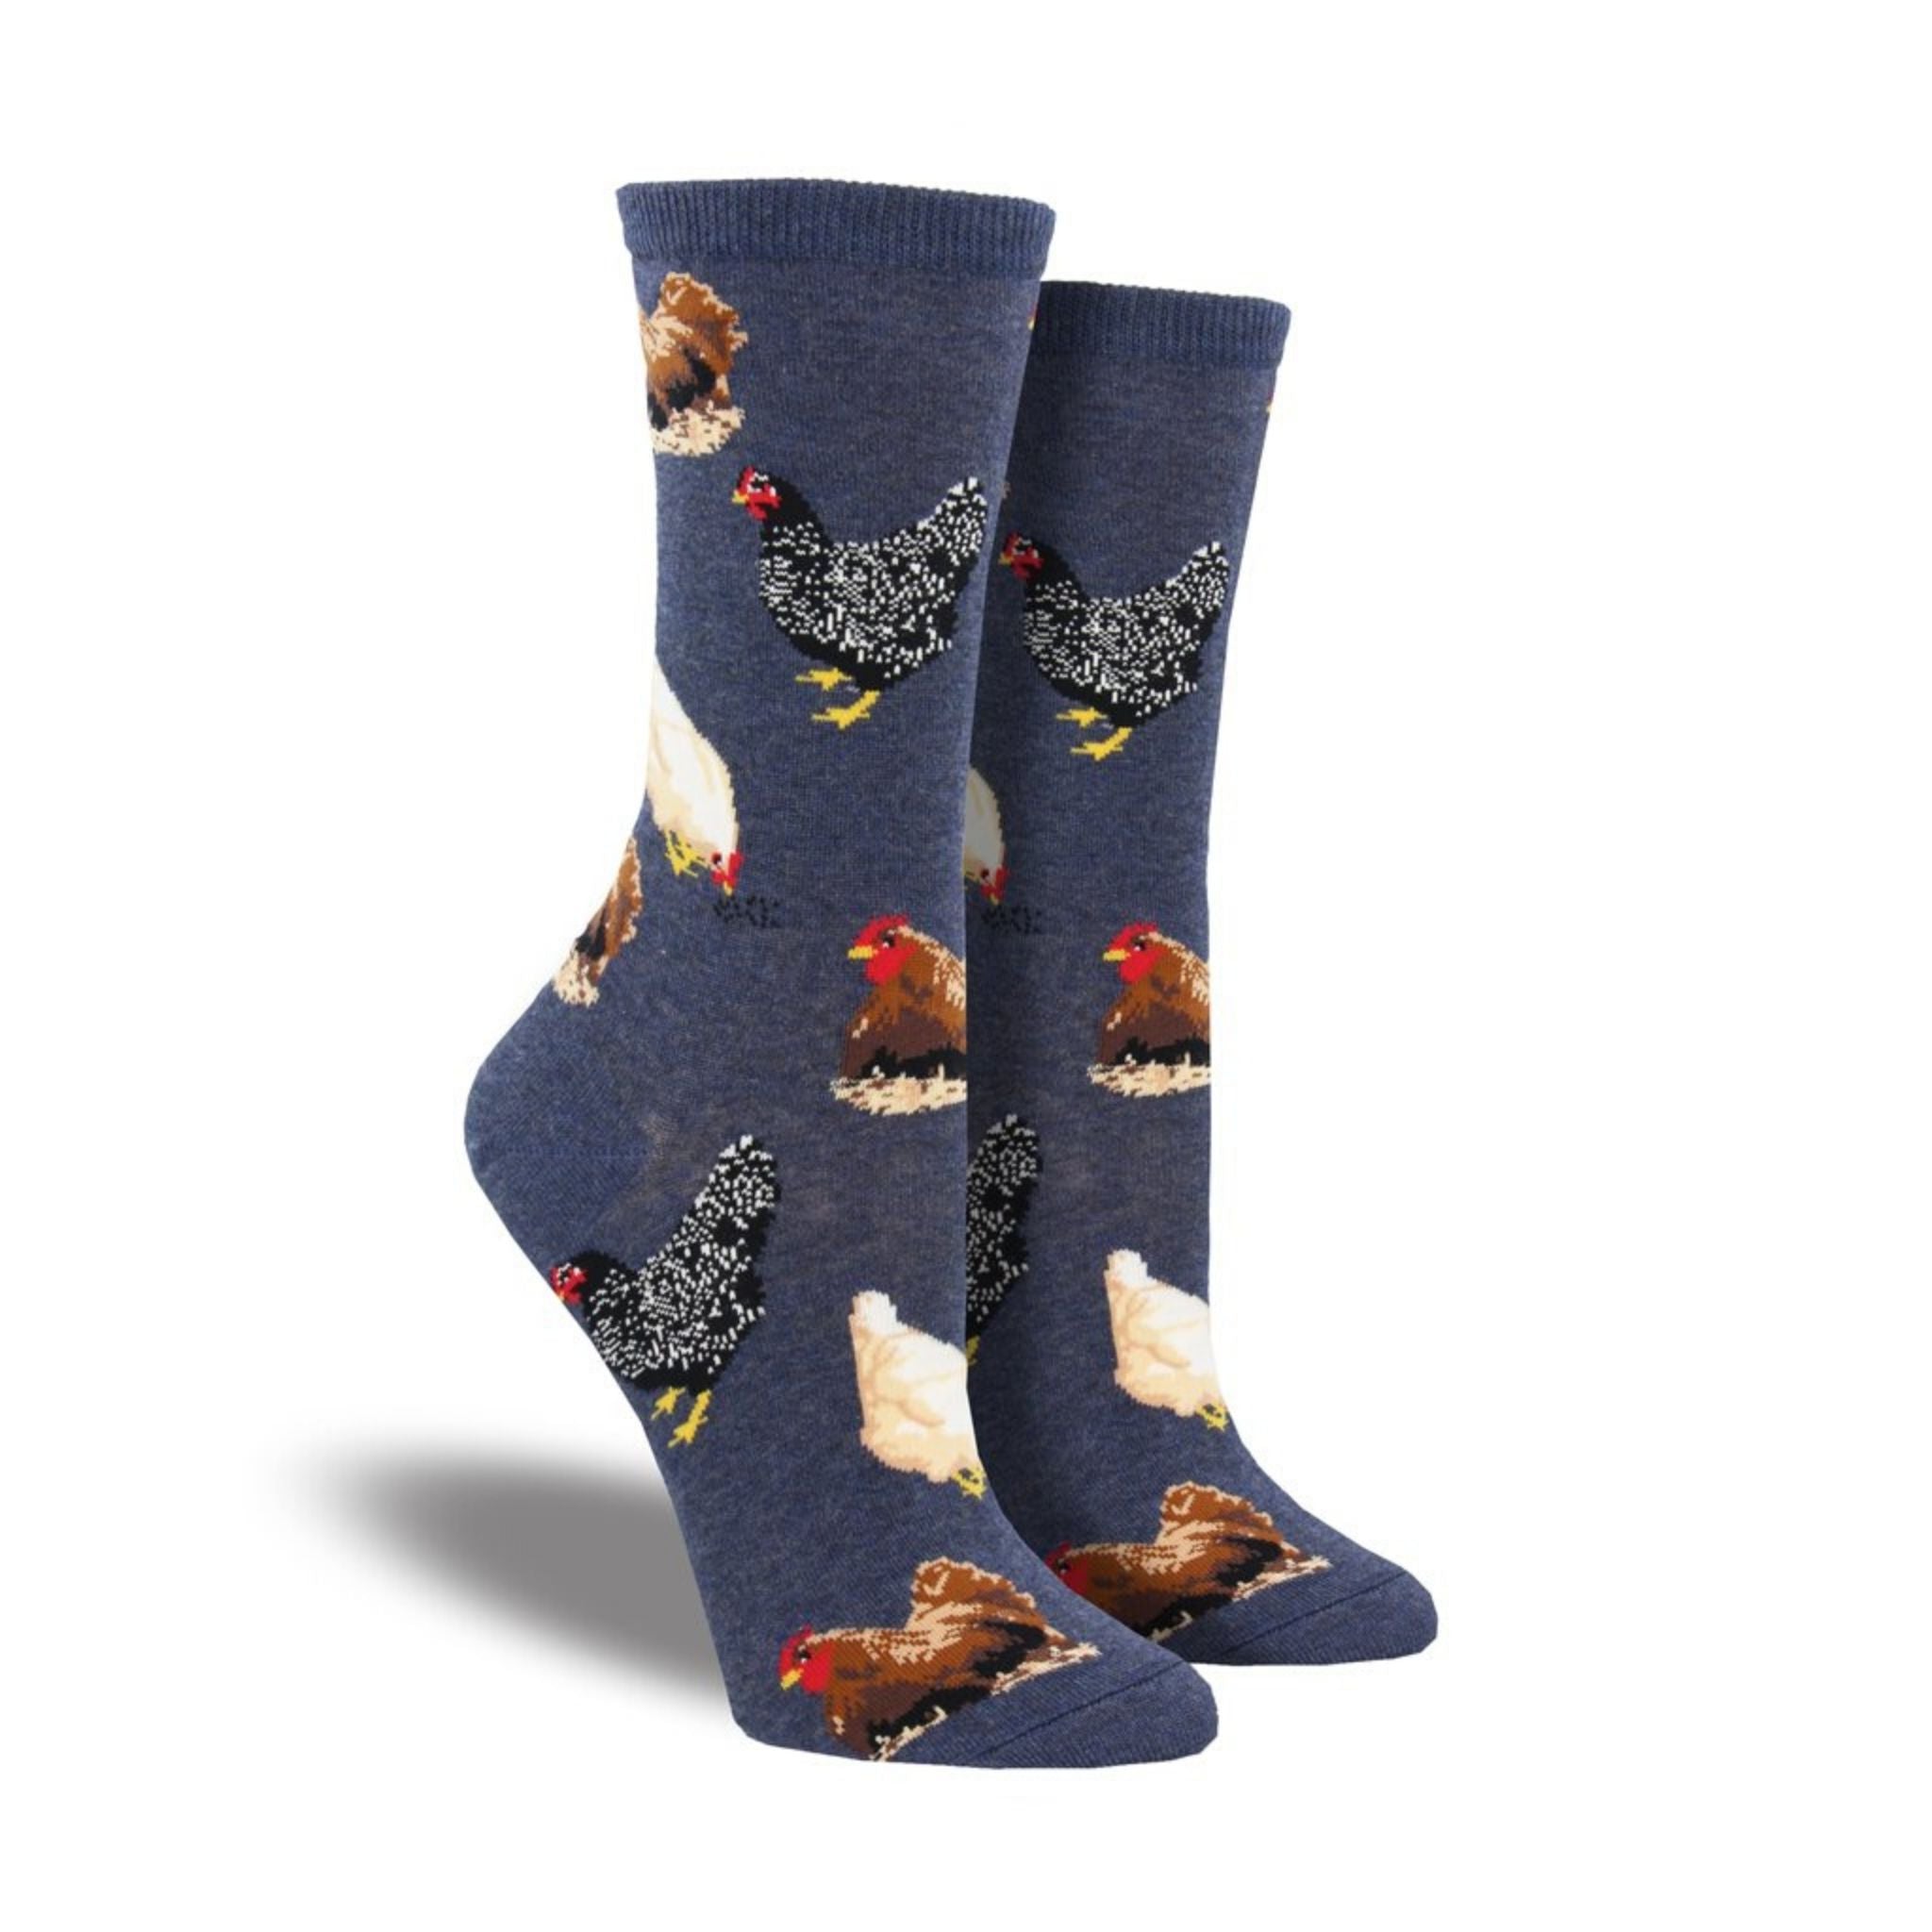 Blue socks with hens on them